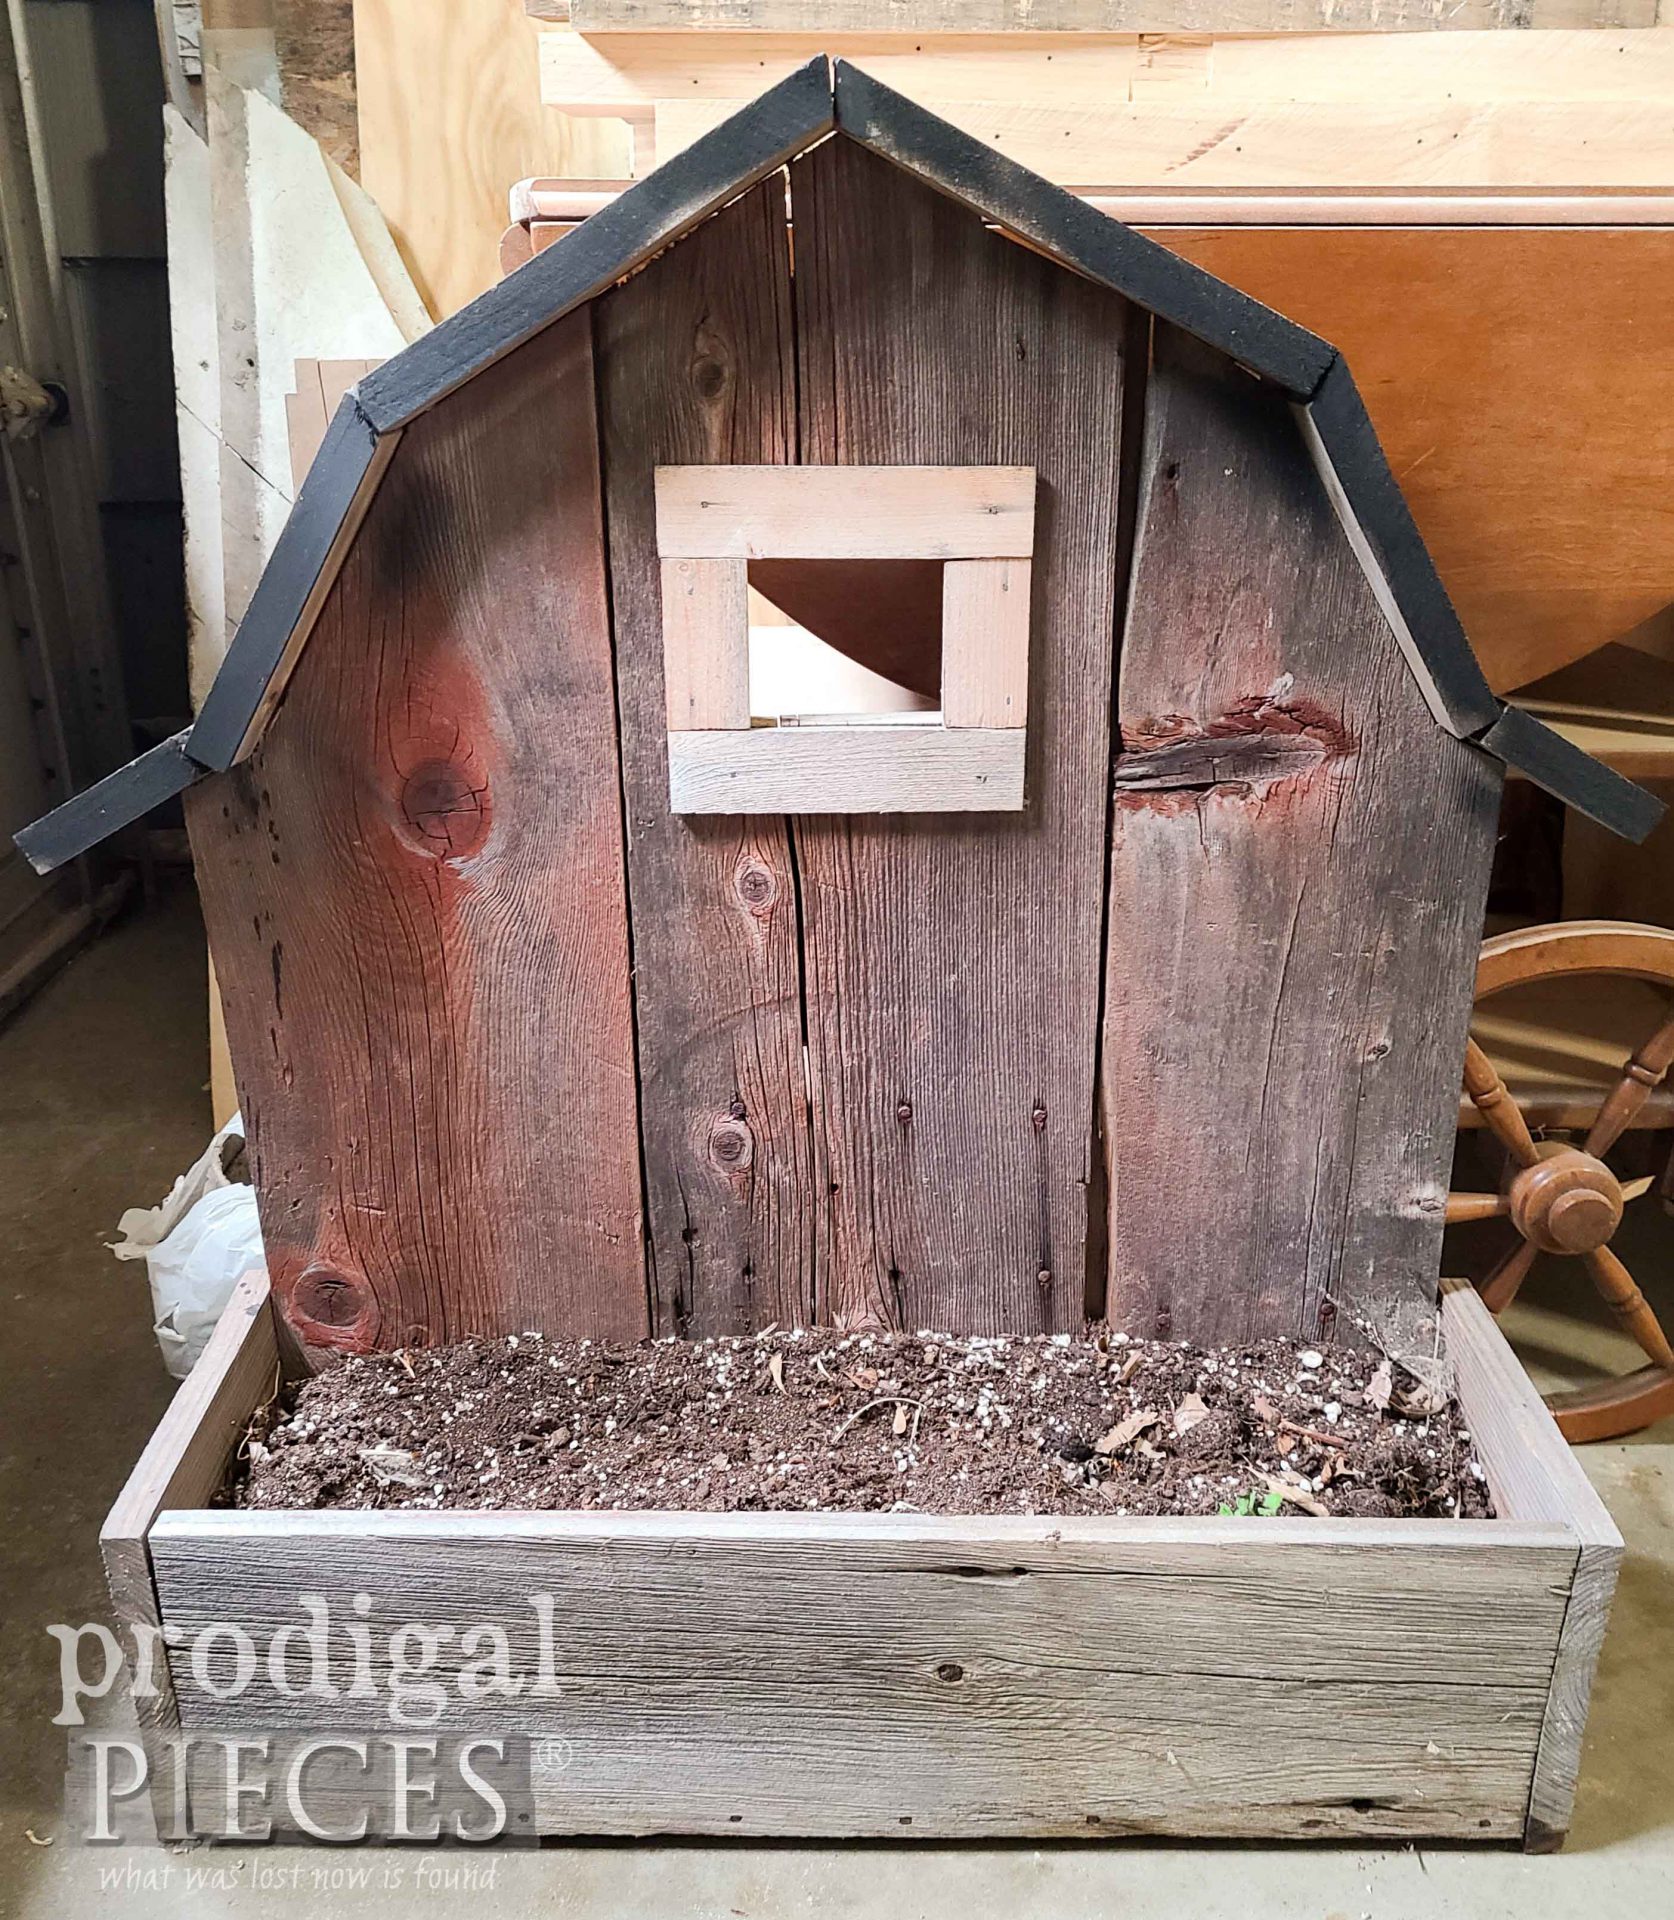 Reclaimed Wood Barn Planter on Curb by Larissa of Prodigal Pieces | prodigalpieces.com #prodigalpieces